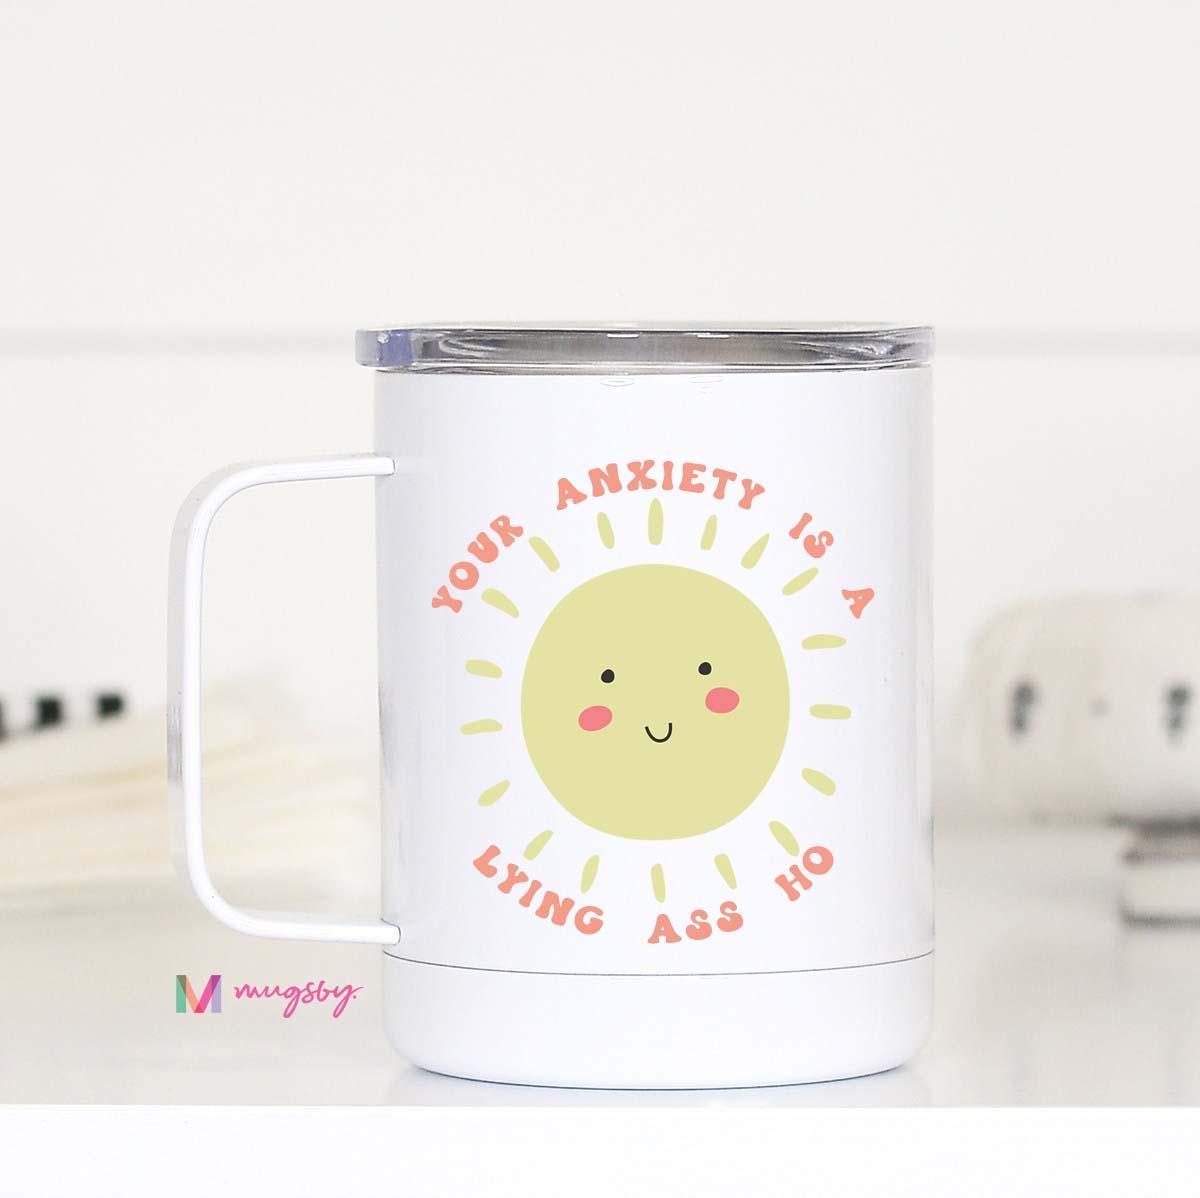 Your Anxiety Travel Cup - The Silver Suitcase